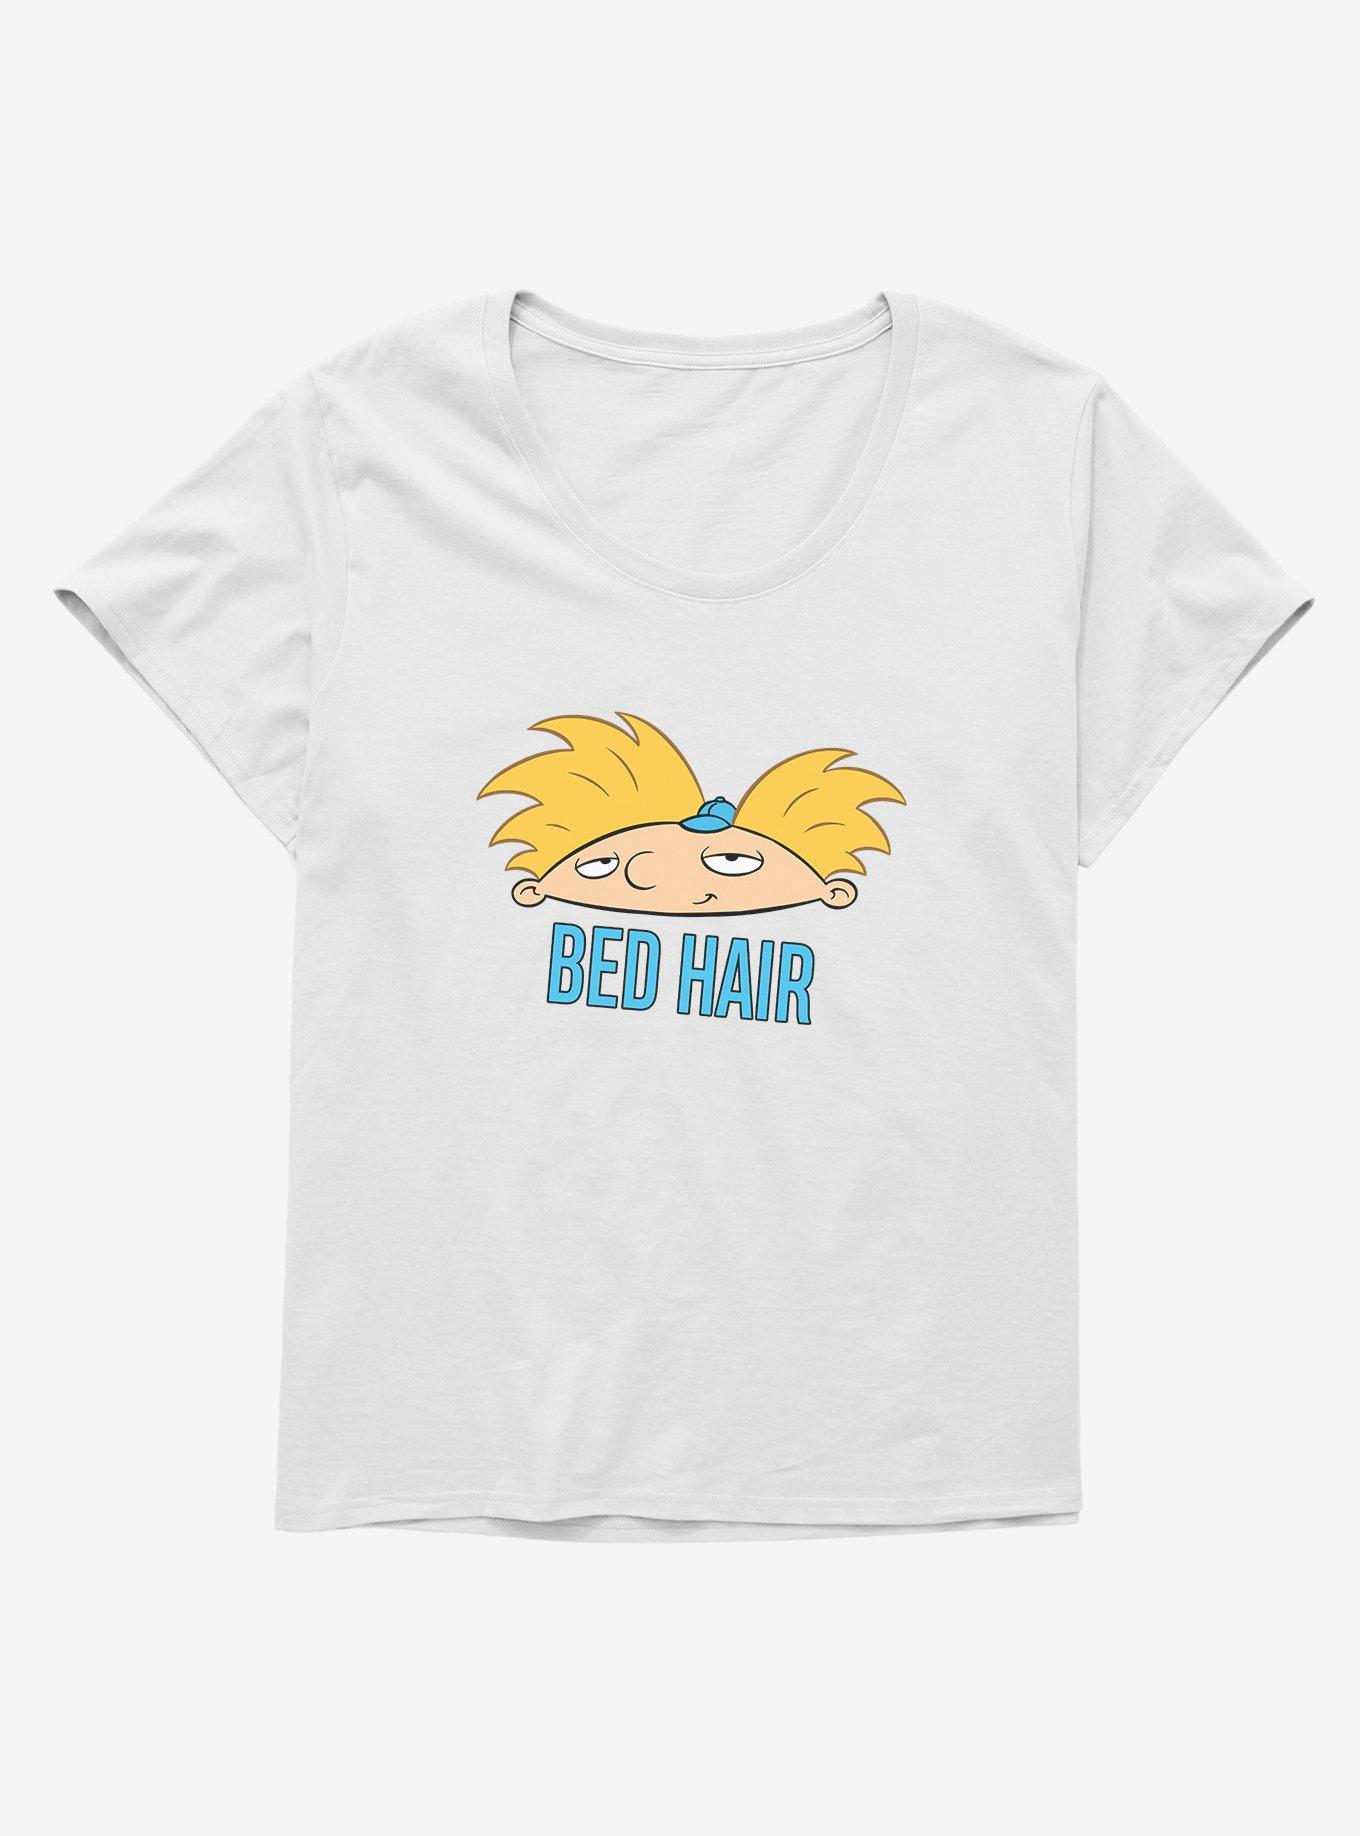 Hey Arnold! Bed Hair Girls T-Shirt Plus